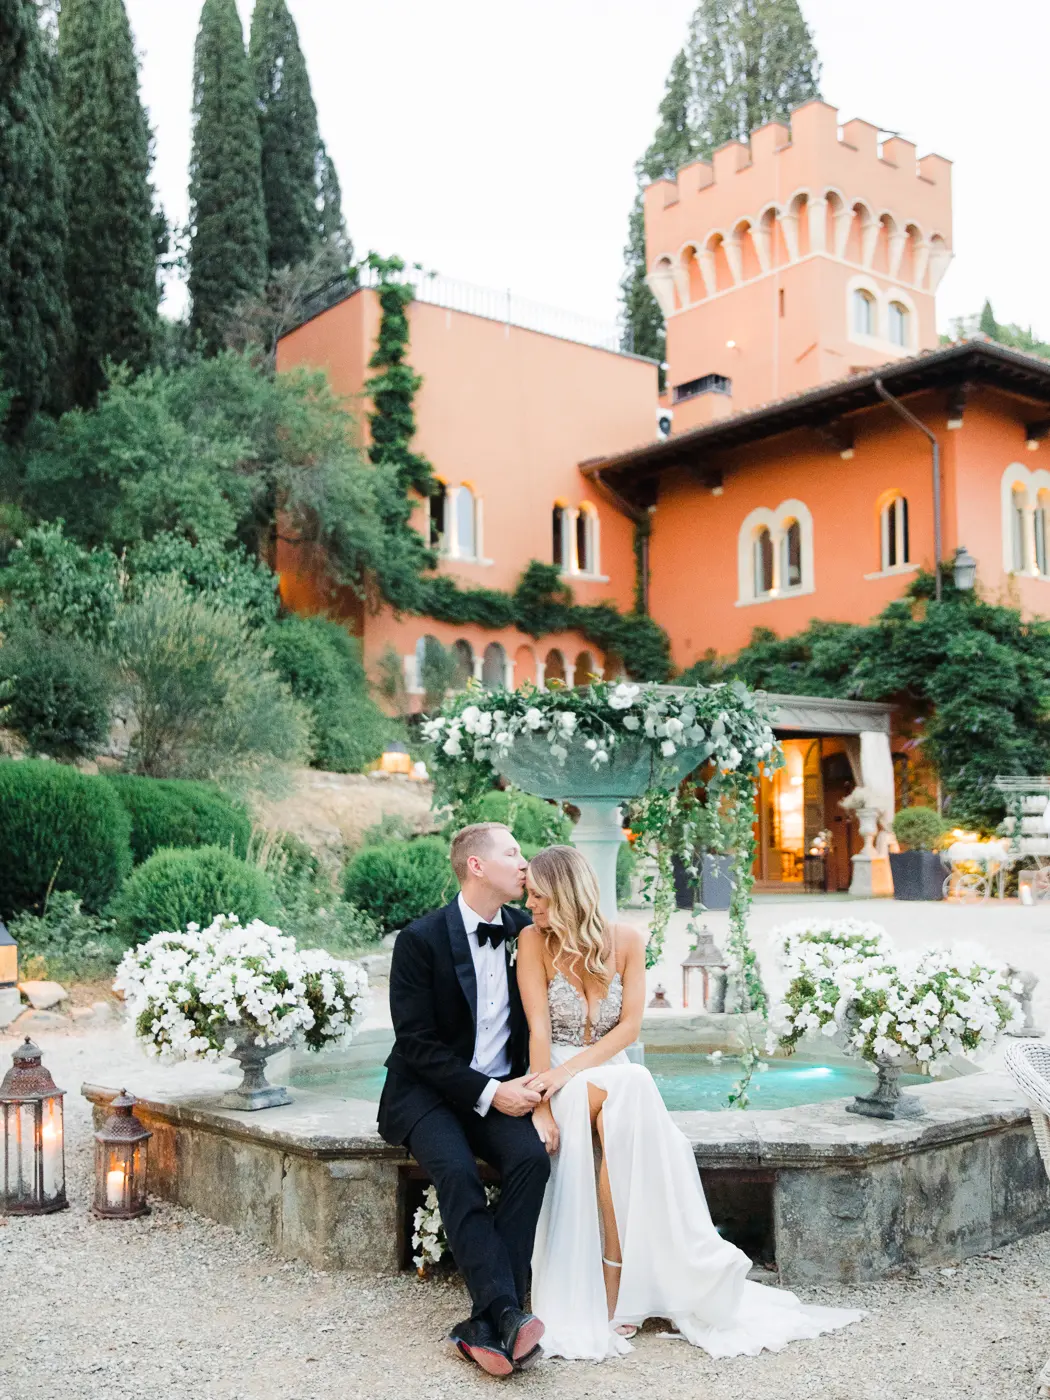 Intimate moment between the newlyweds captured in the courtyard of a Tuscan villa, surrounded by the romance of Italy's medieval history.